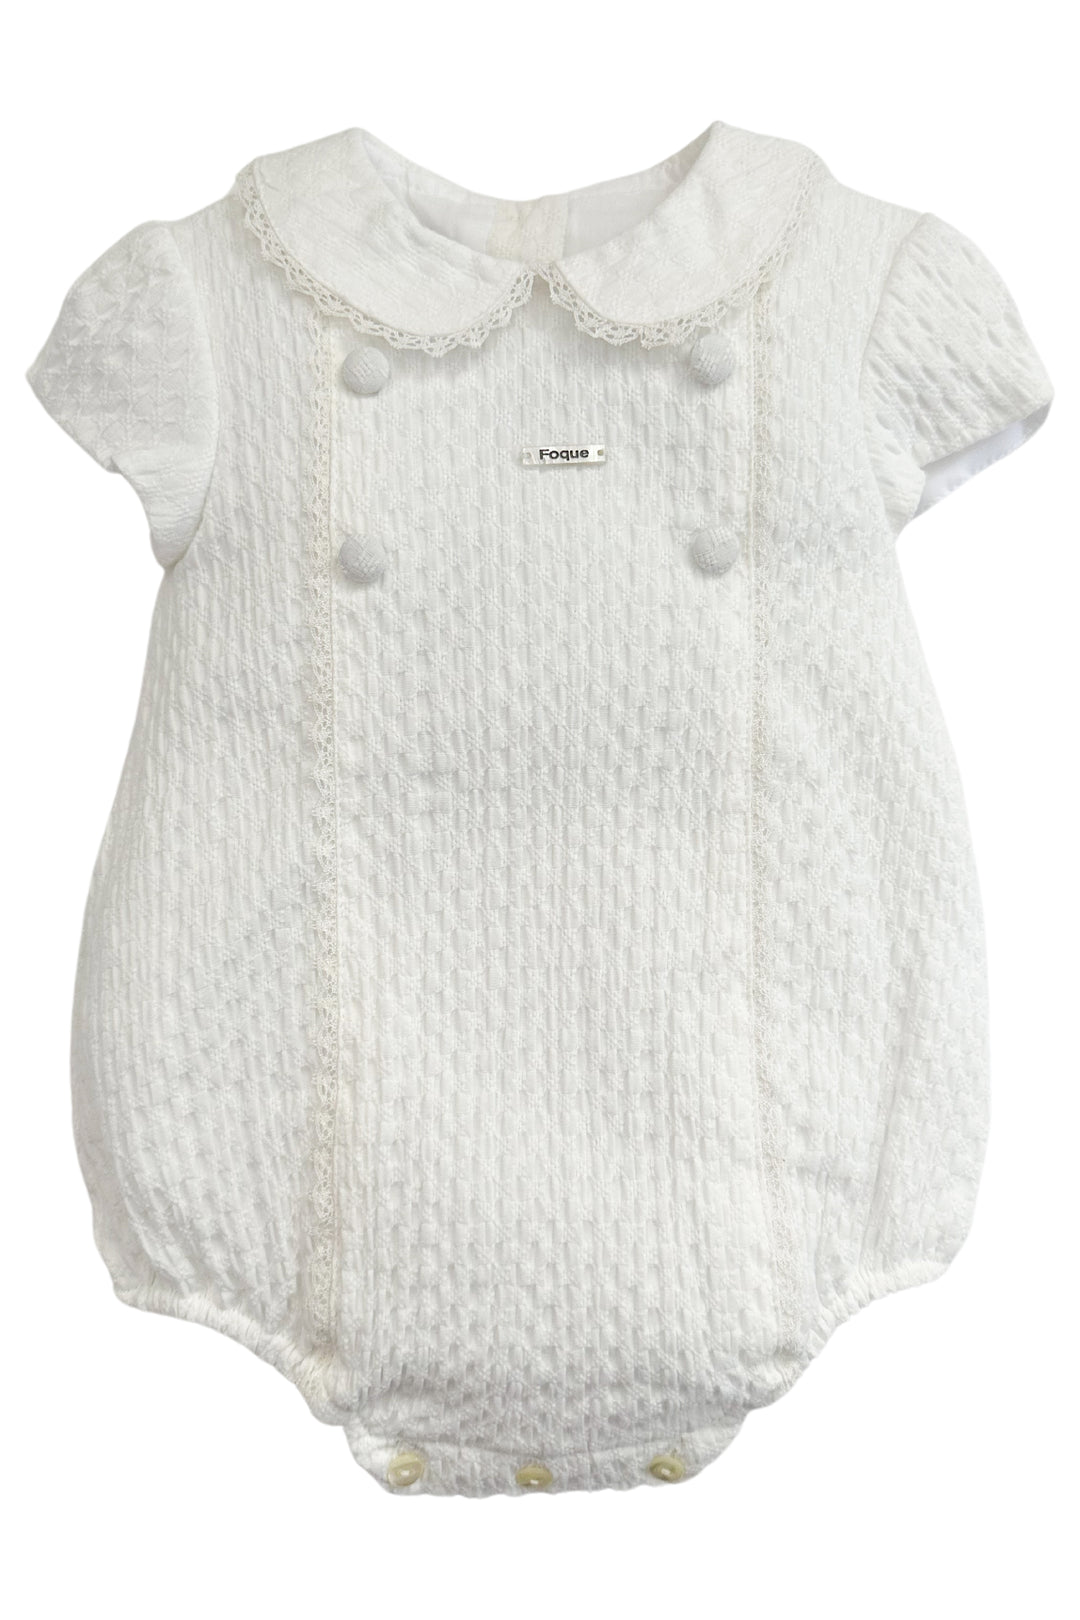 Foque "Lux" Ivory Cotton Romper | Millie and John